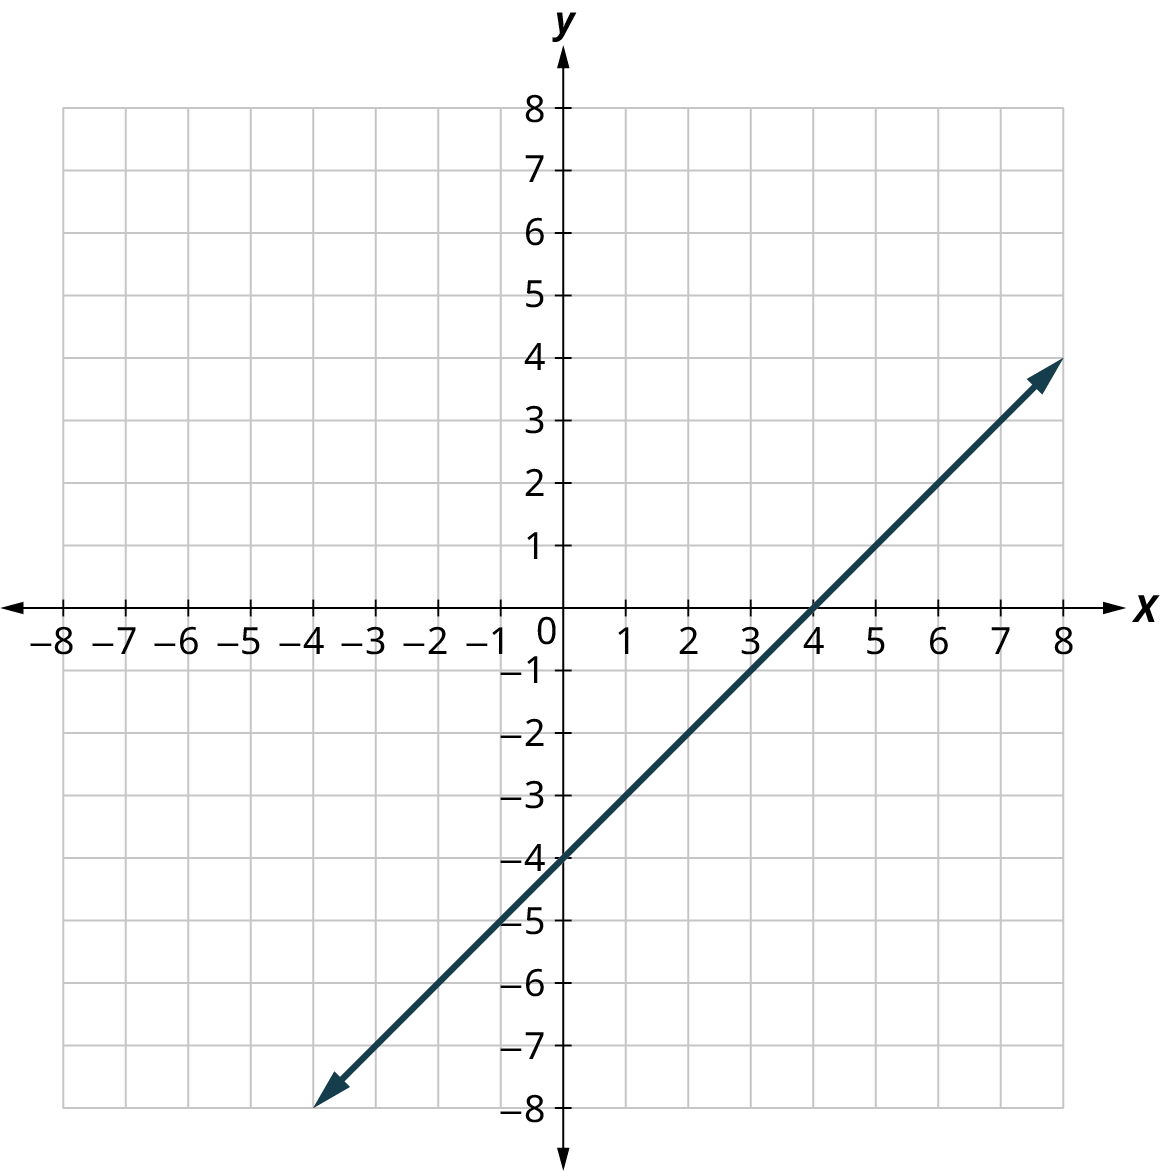 A line is plotted on an x y coordinate plane. The x and y axes range from negative 8 to 8, in increments of 1. The line passes through the points, (negative 3, negative 7), (0, negative 4), (4, 0), and (7, 3).